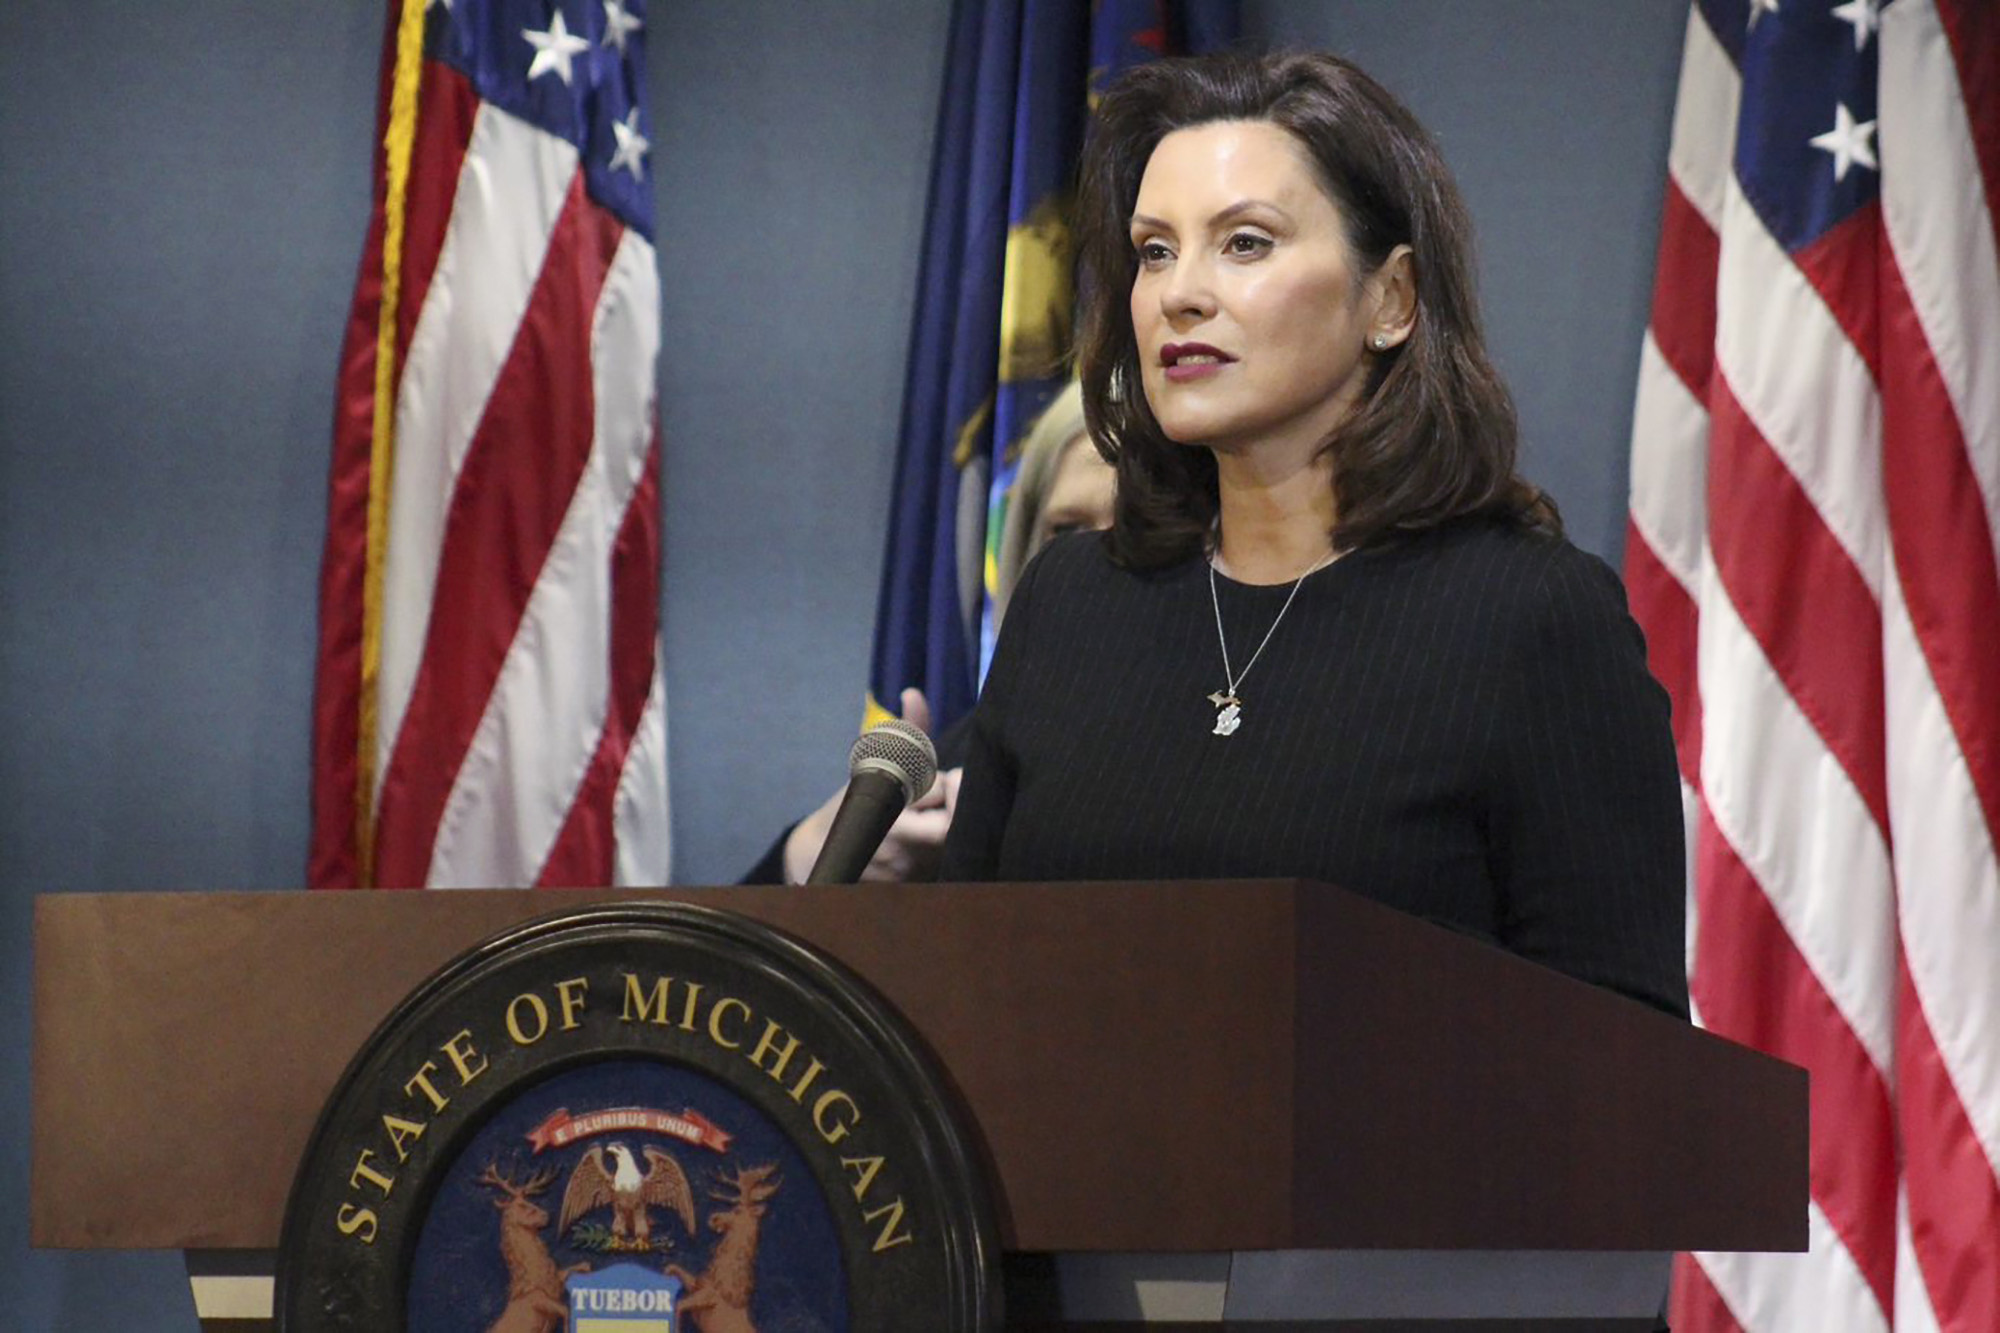 PHOTO: Michigan Gov. Gretchen Whitmer addresses the state during a speech in Lansing, Mich., April 29, 2020. The governor proposed free college for health care workers and others involved in the coronavirus fight.